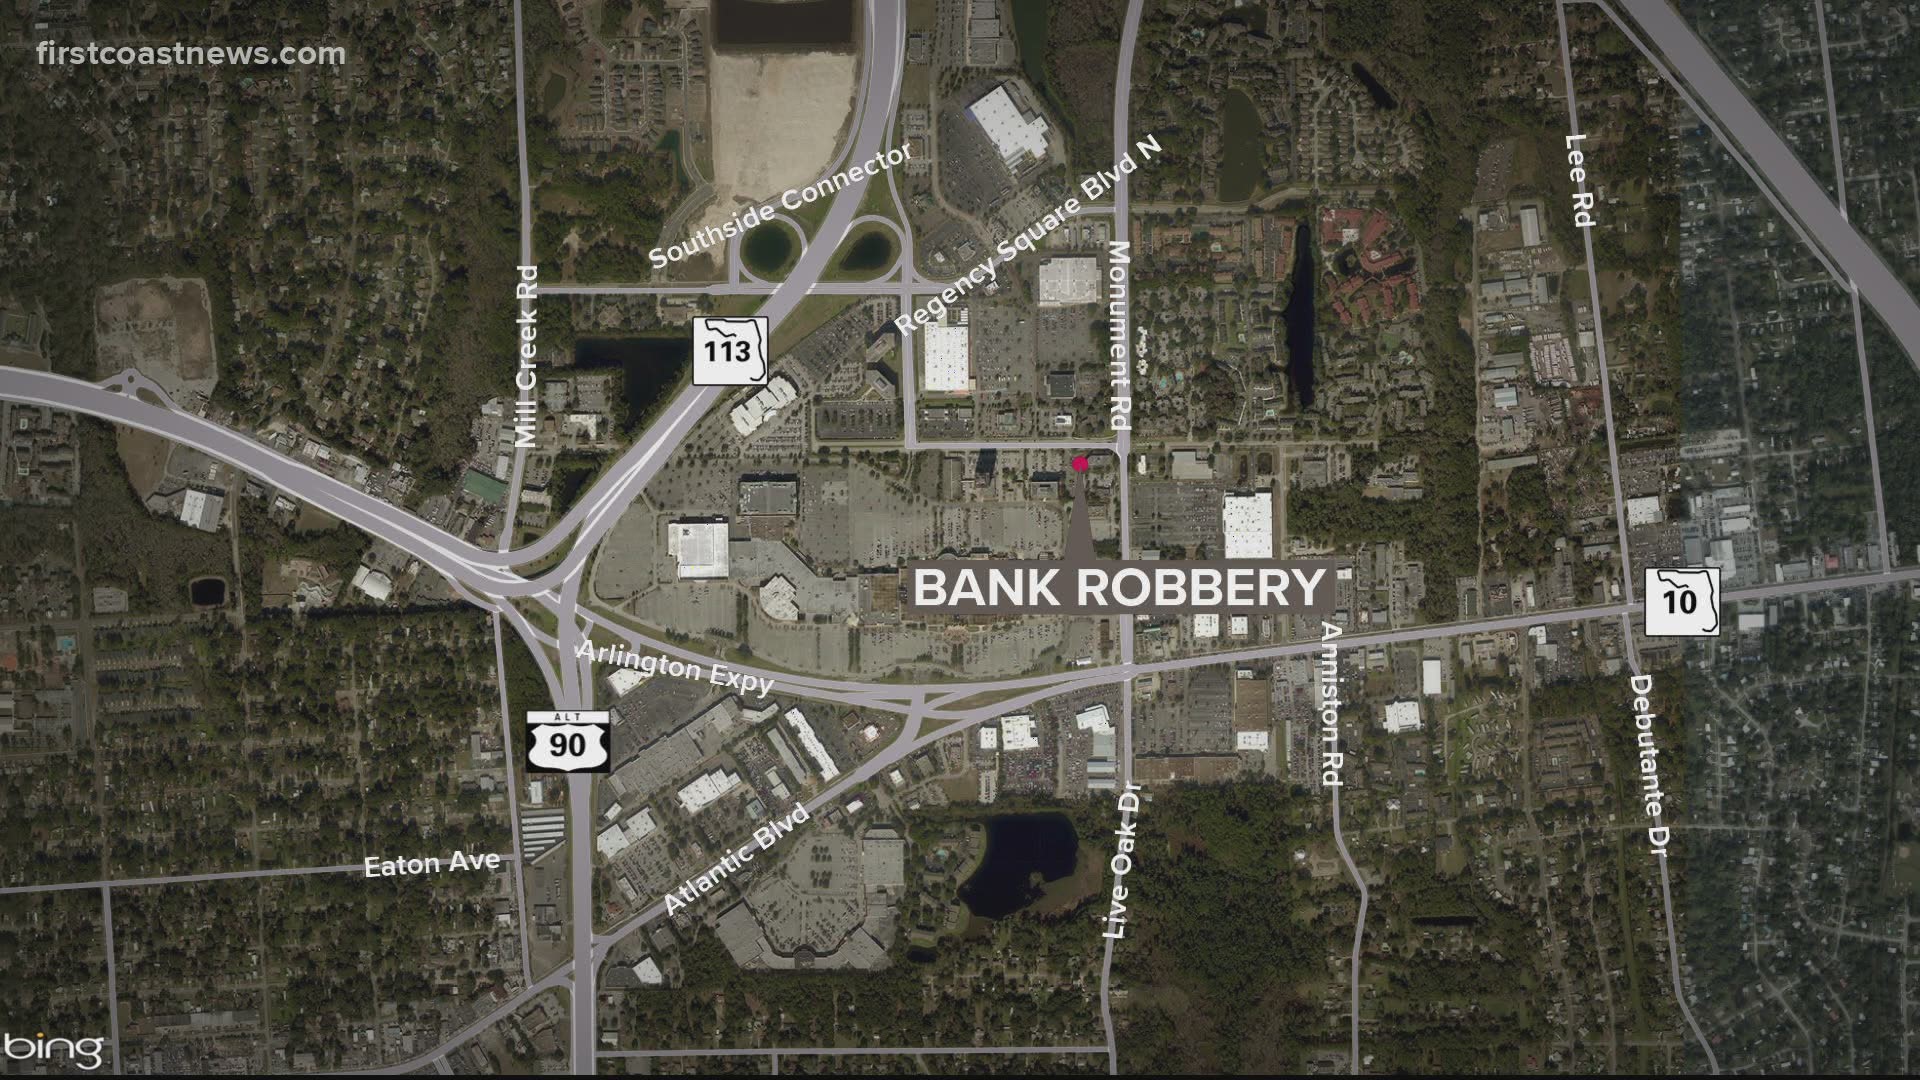 Police confirmed that this is the third bank robbery this week in Jacksonville.